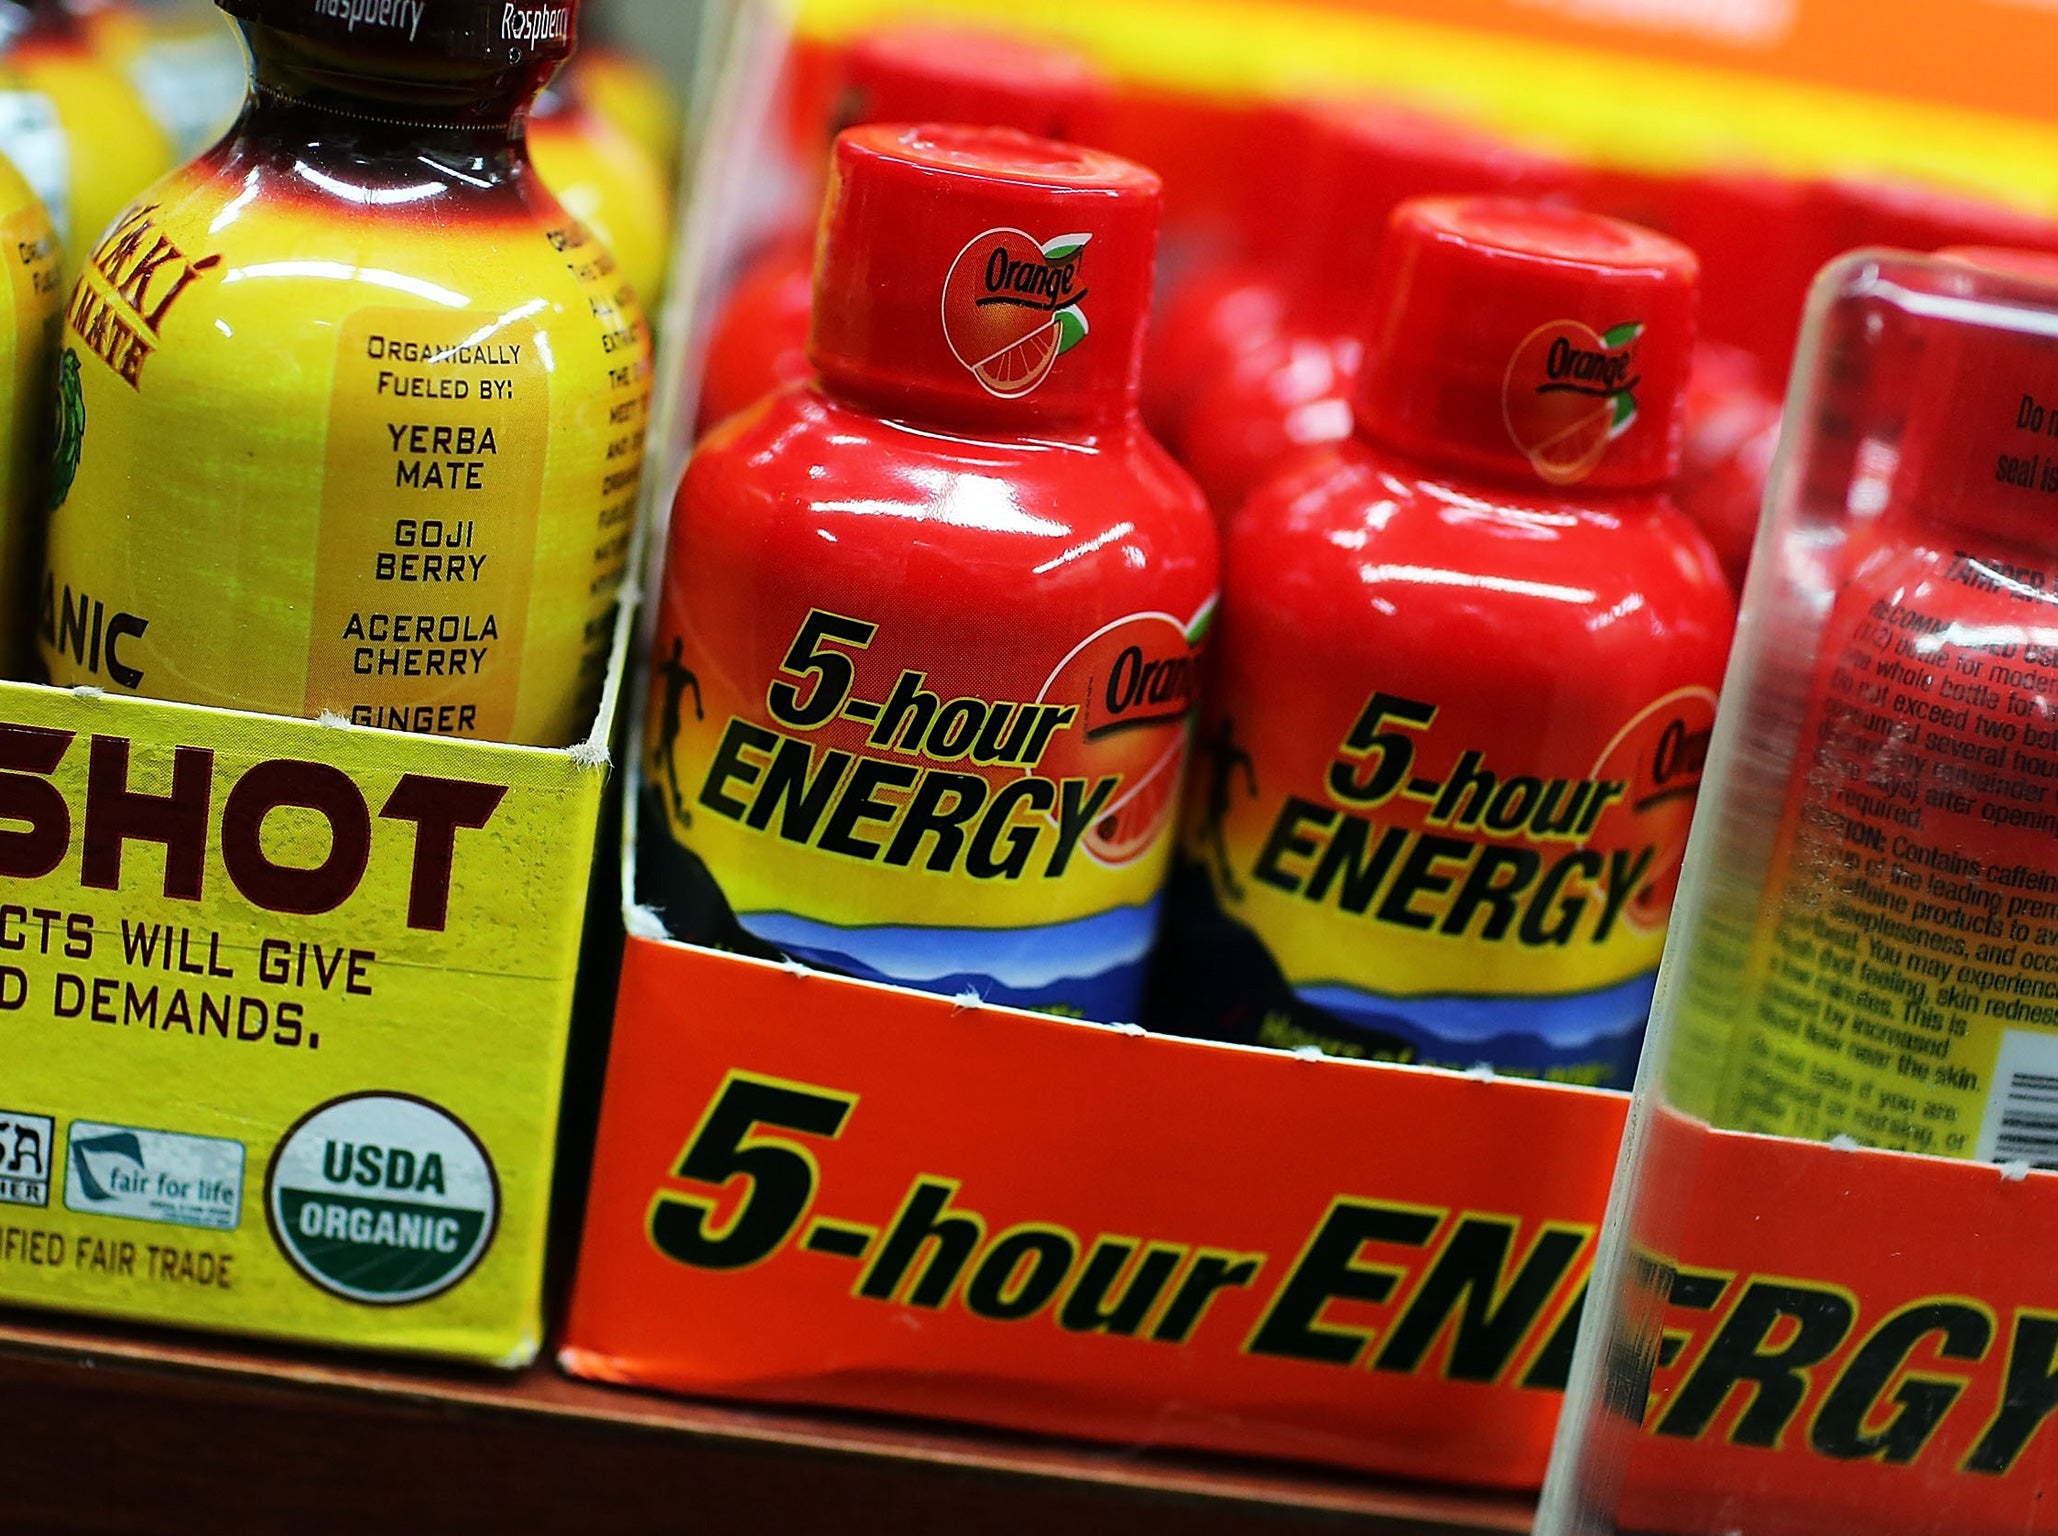 5-hour Energy, which is marketed as a pick-me-up, is under investigation by the Food and Drug Administation